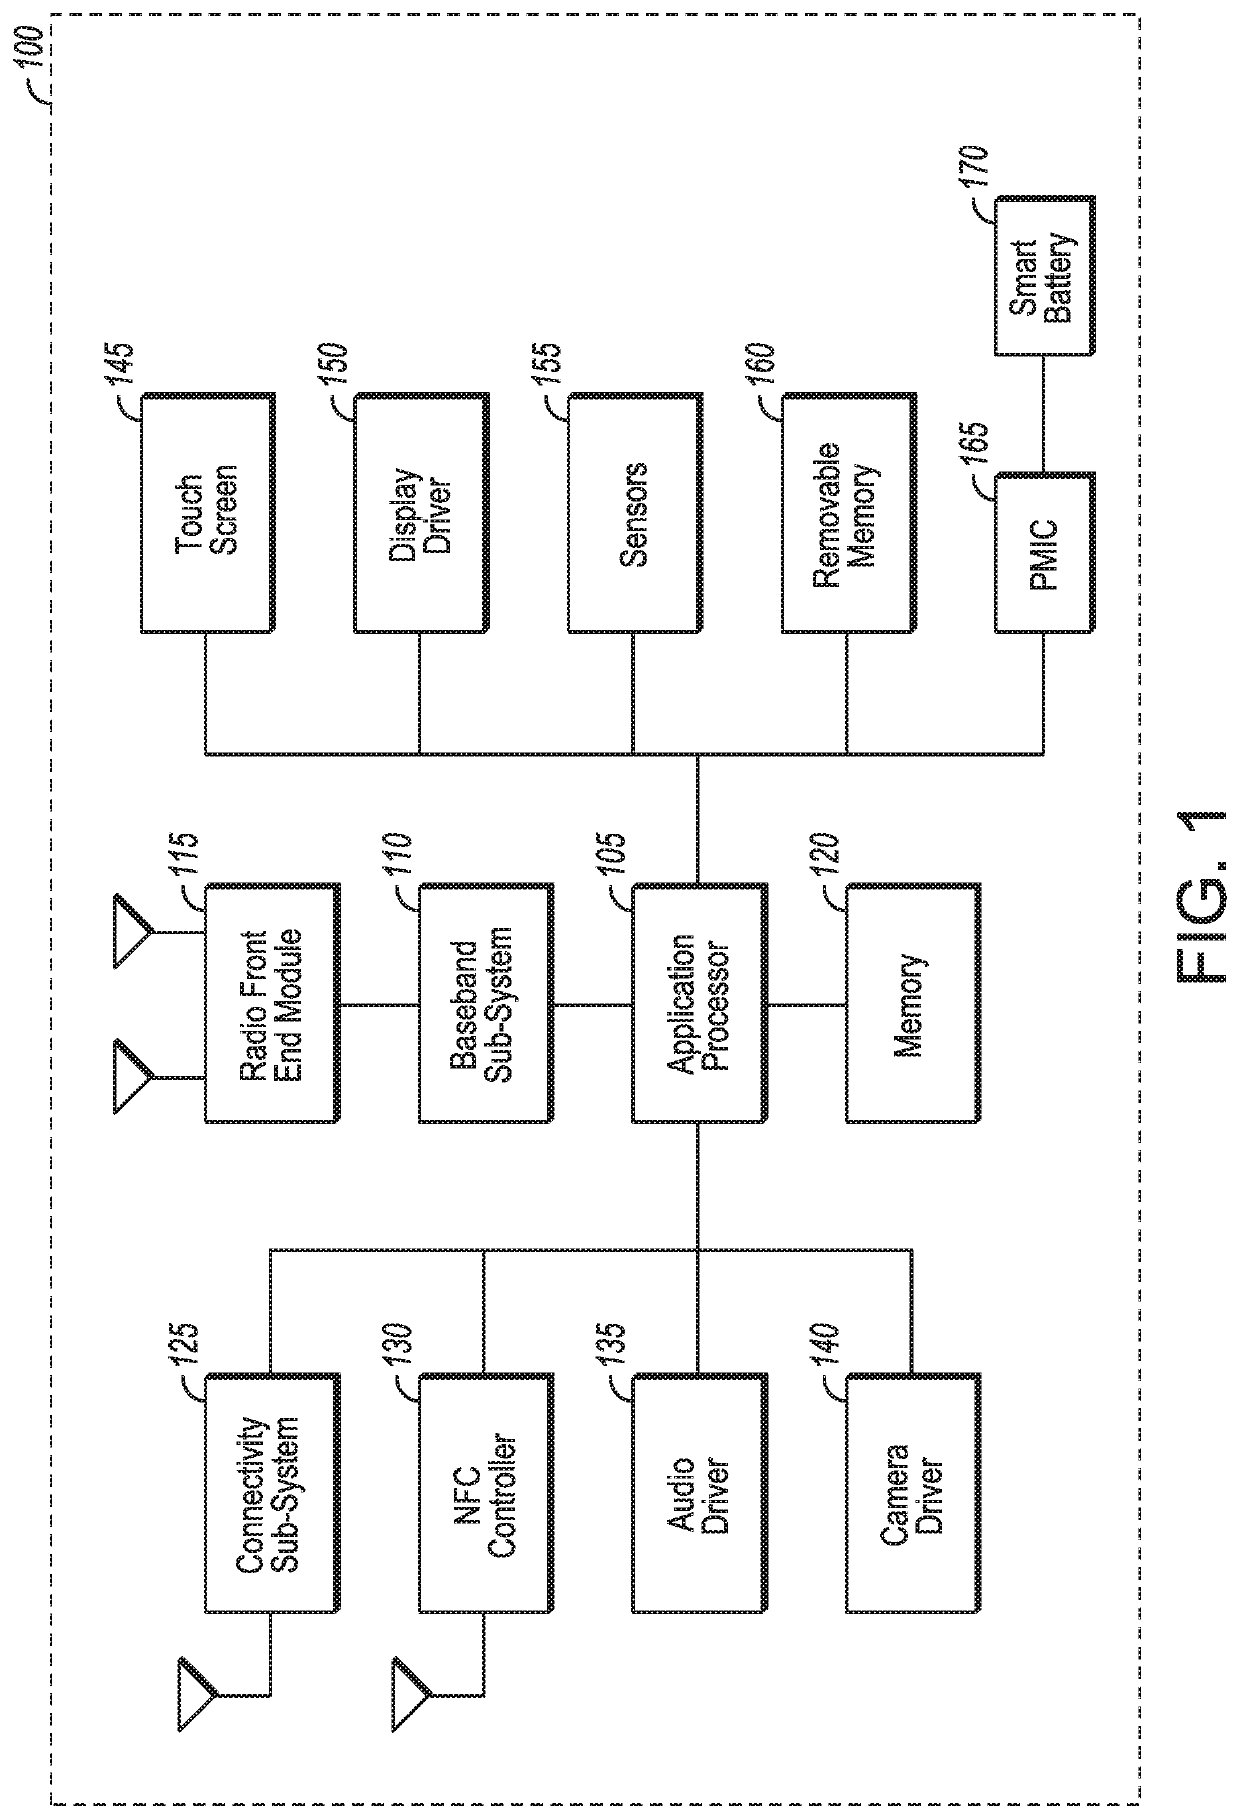 System and method using collaborative learning of interference environment and network topology for autonomous spectrum sharing